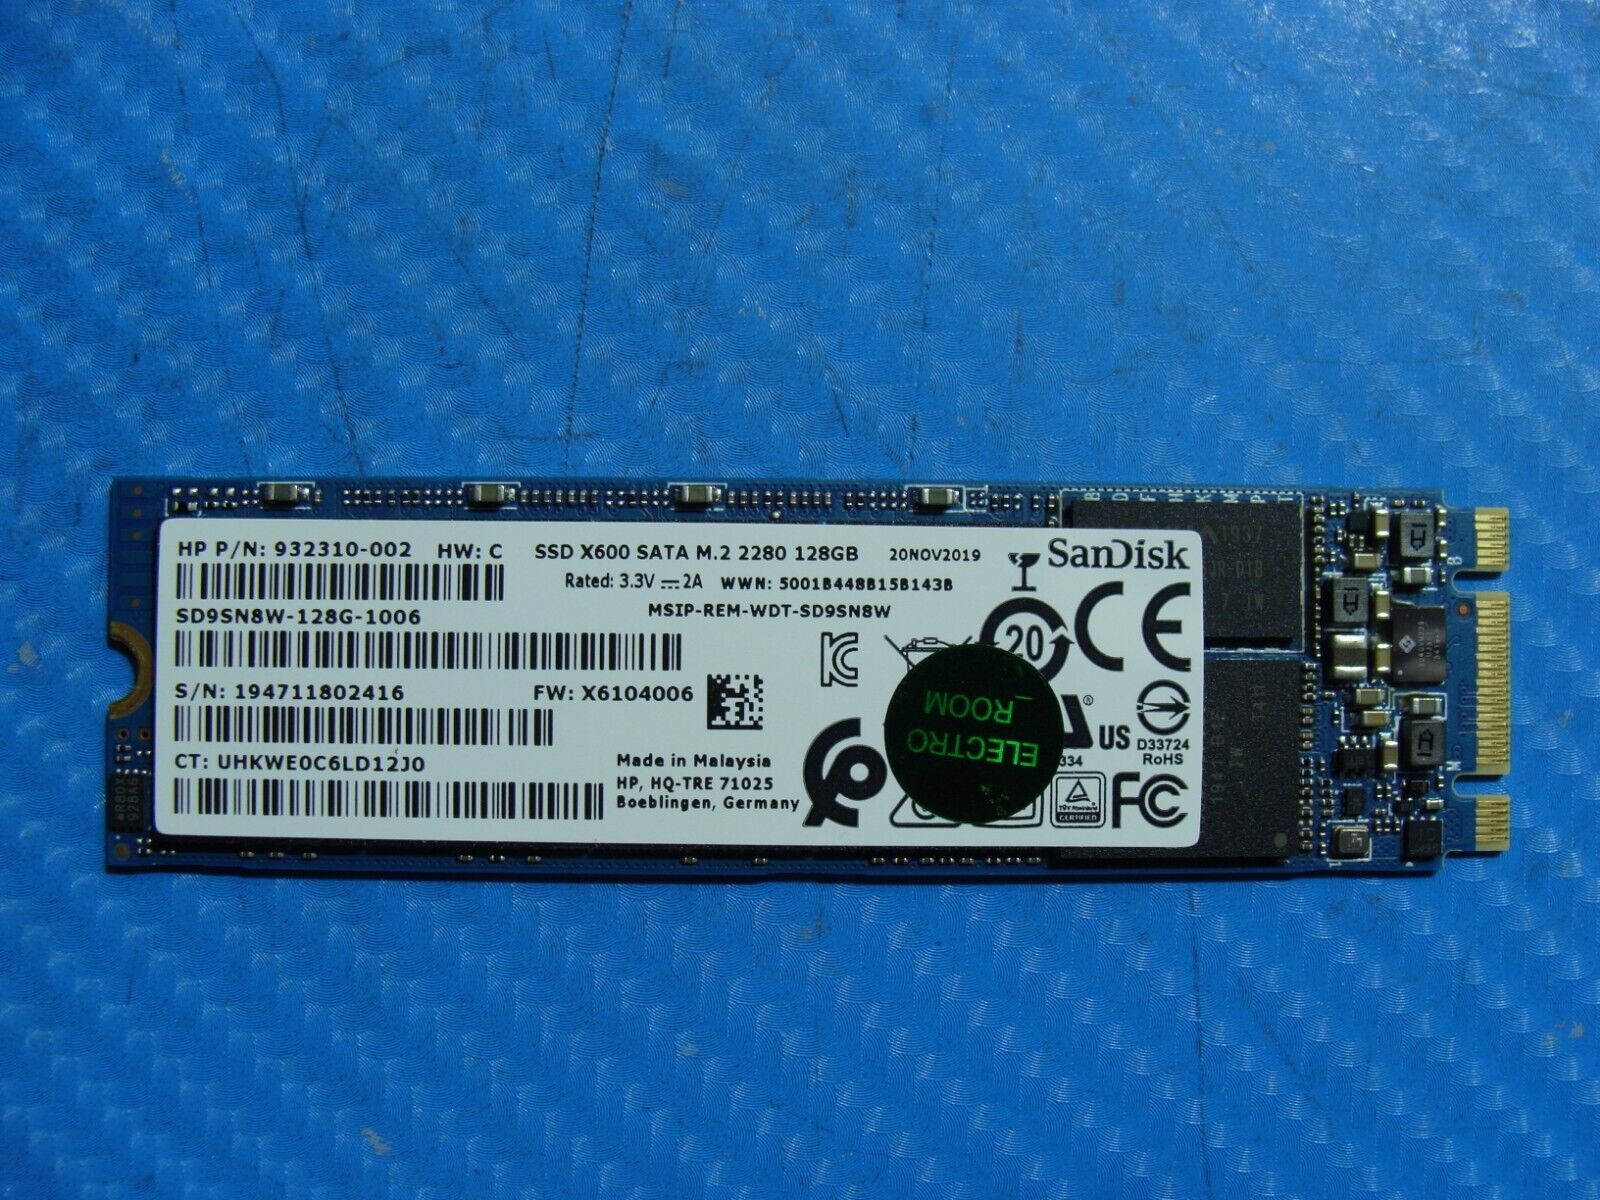 HP 840 G6 SanDisk x600 128Gb Sata M.2 Ssd Solid State Drive SD9SN8W-128G-1006